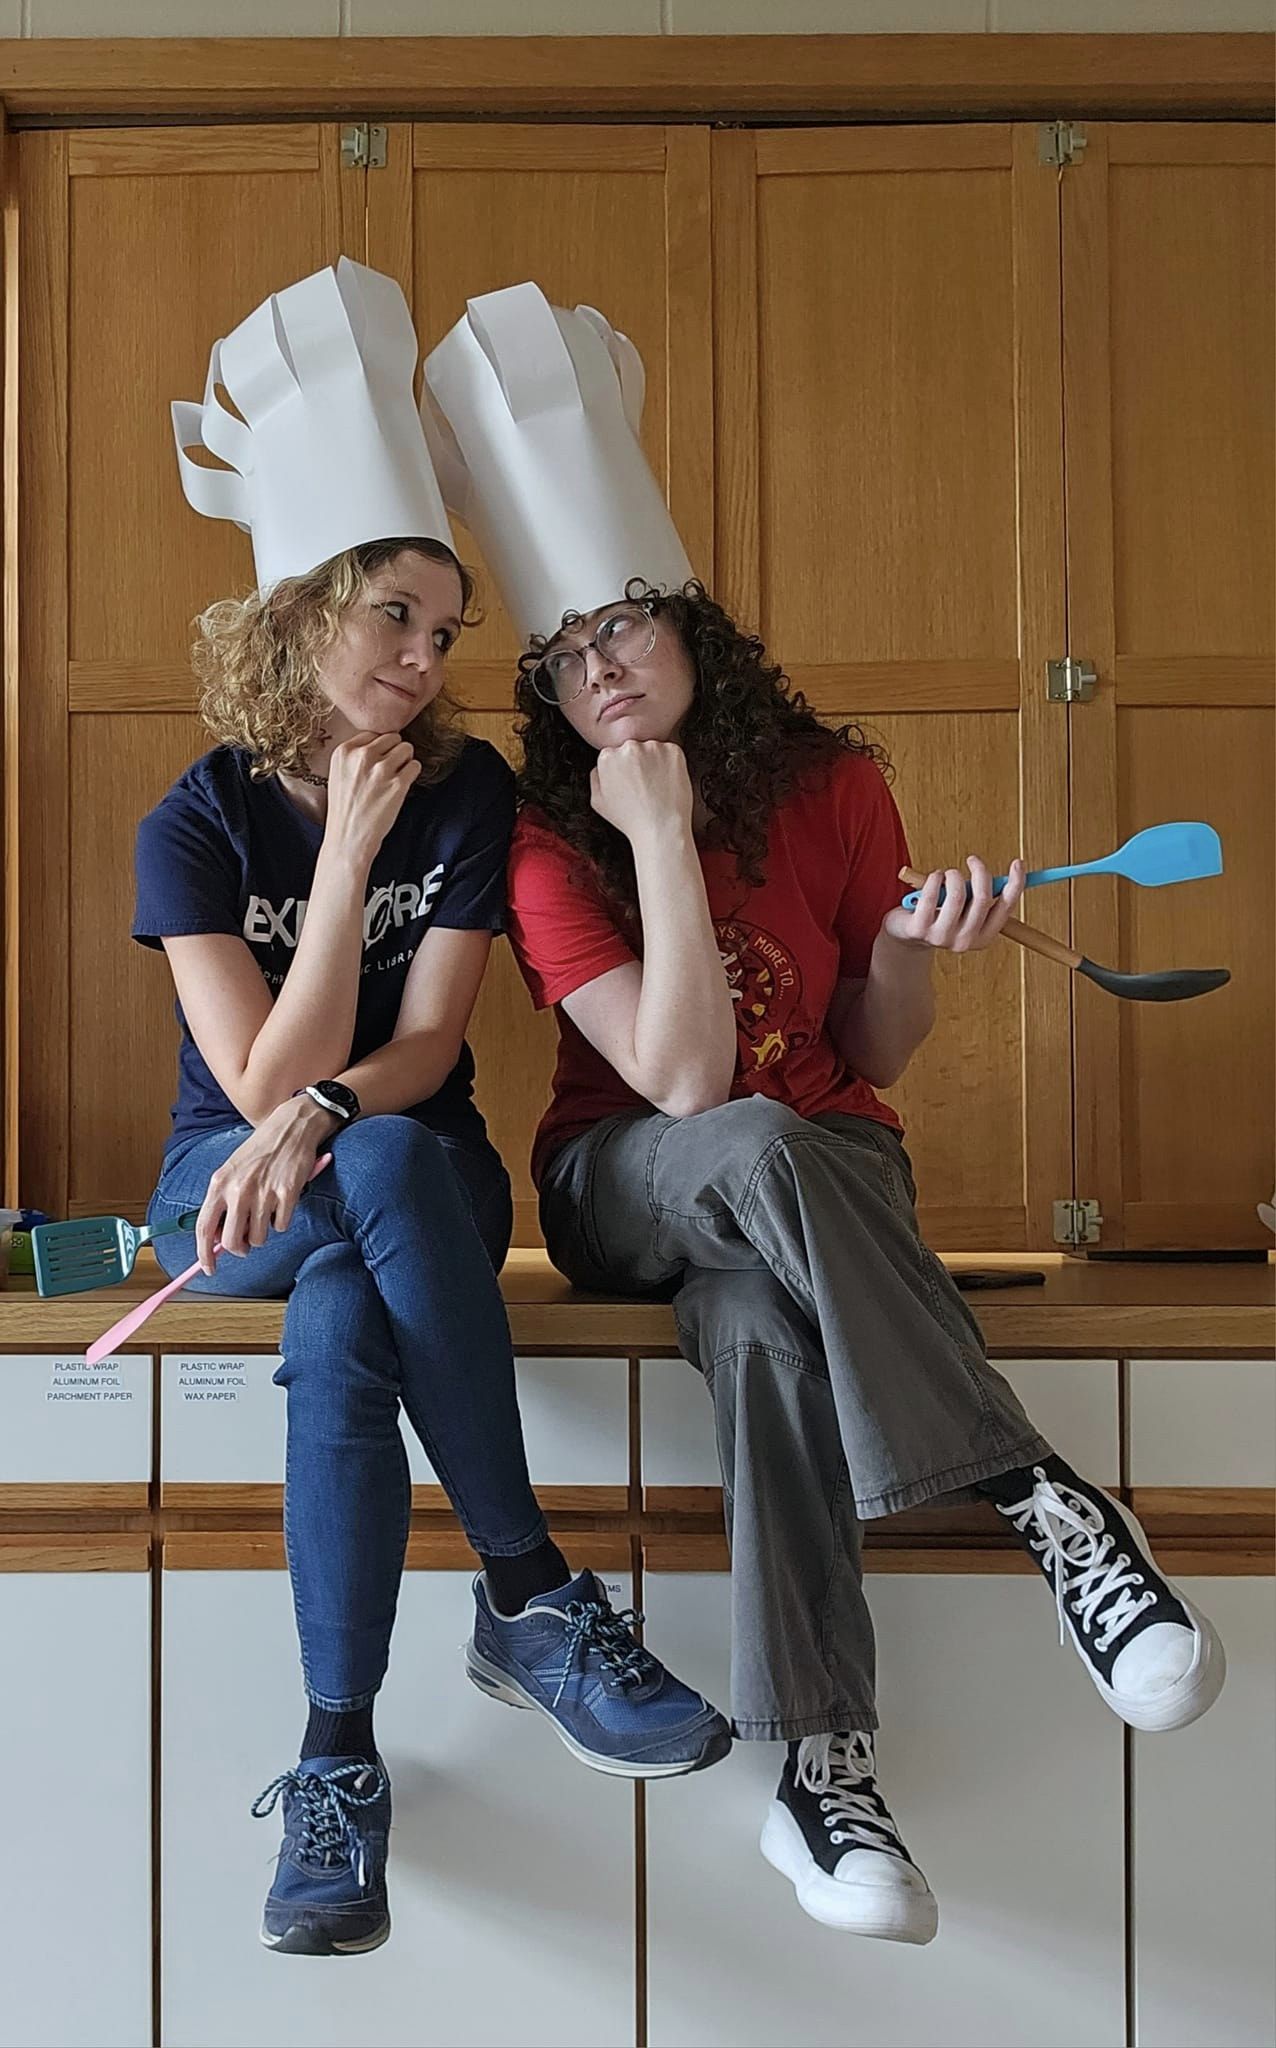 Laura and Ascher wearing chef hats and looking both tired and amused while holding spatulas